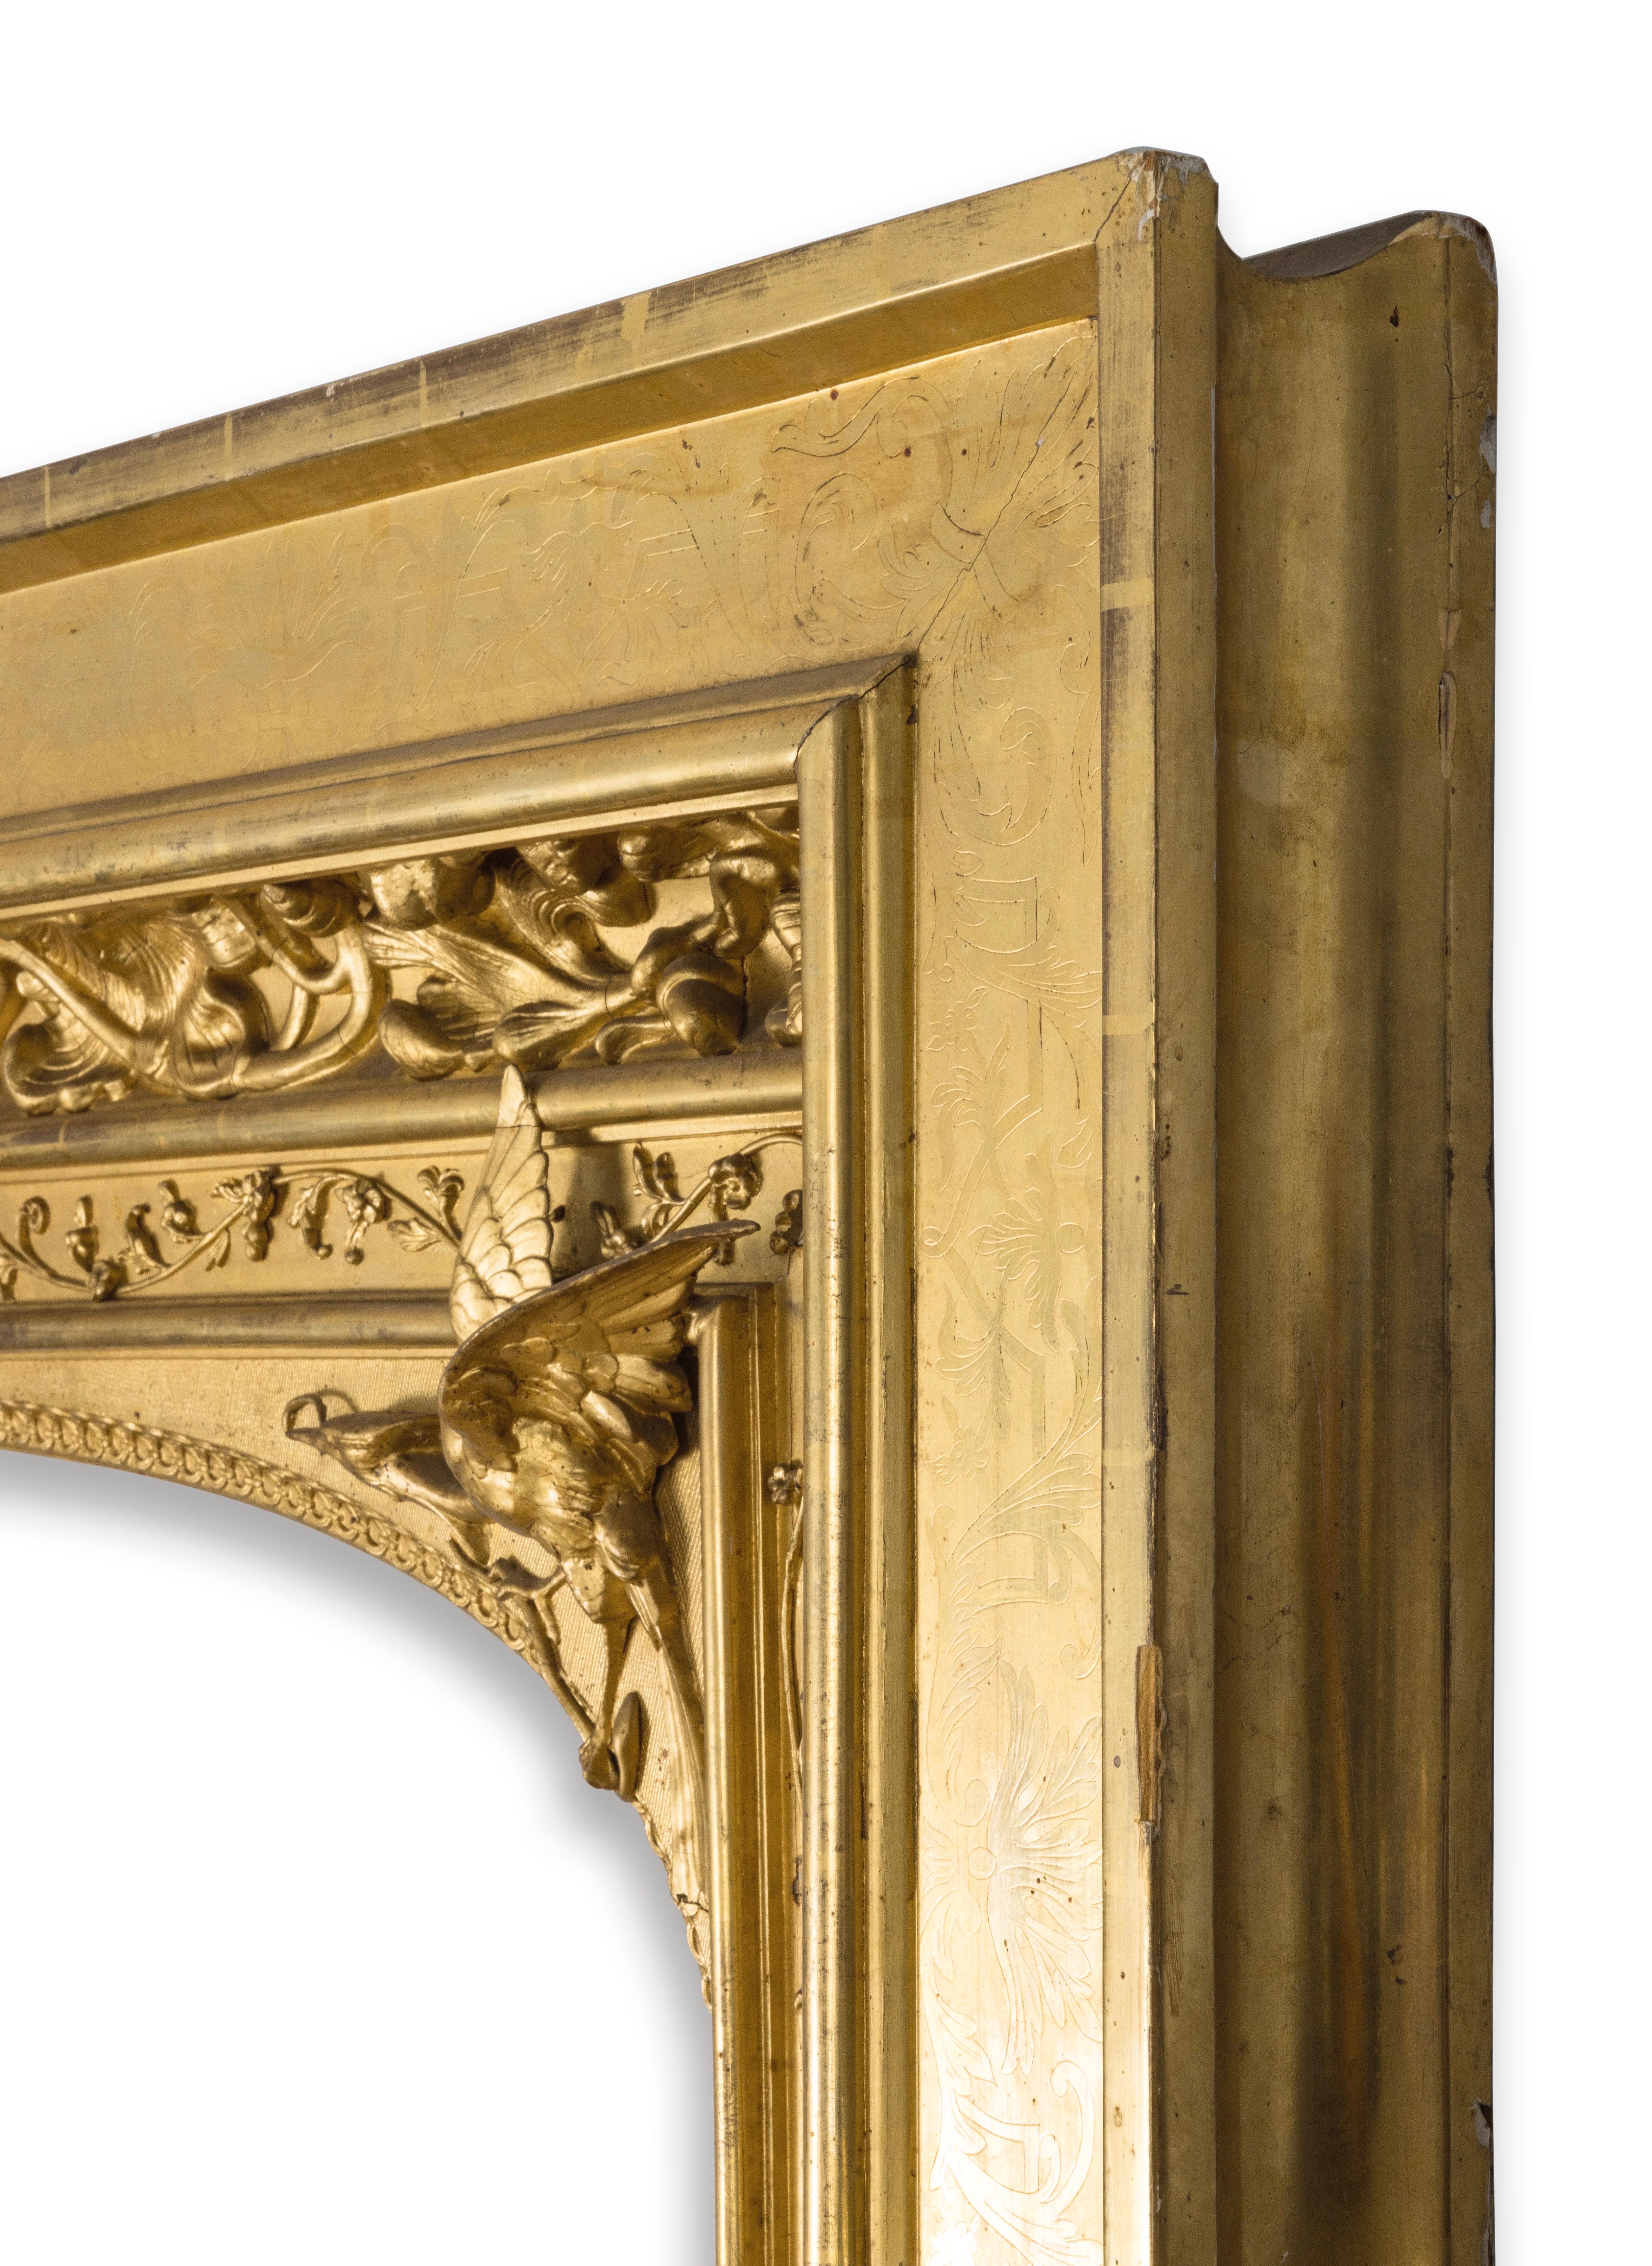 Very Large Renaissance Revival Gilded French Frame 19th Century, Circa 1835 For Sale 2